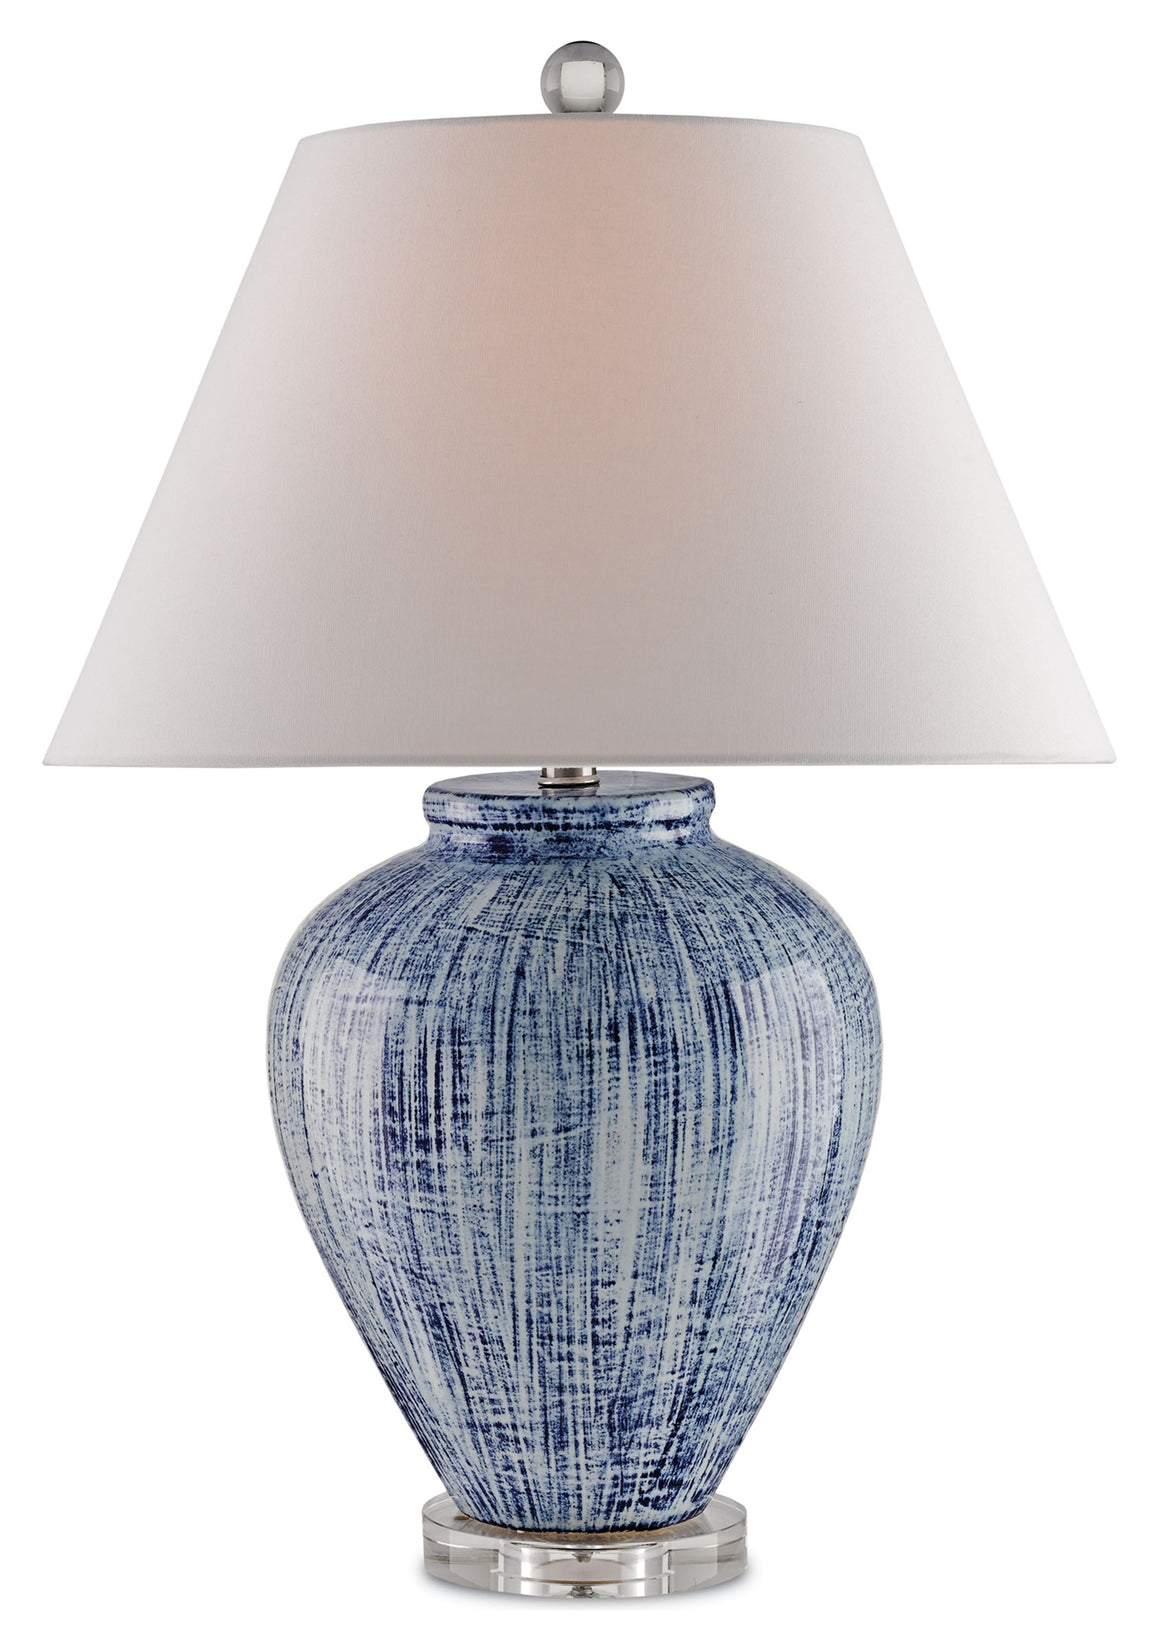 Currey and Company Malaprop Table Lamp